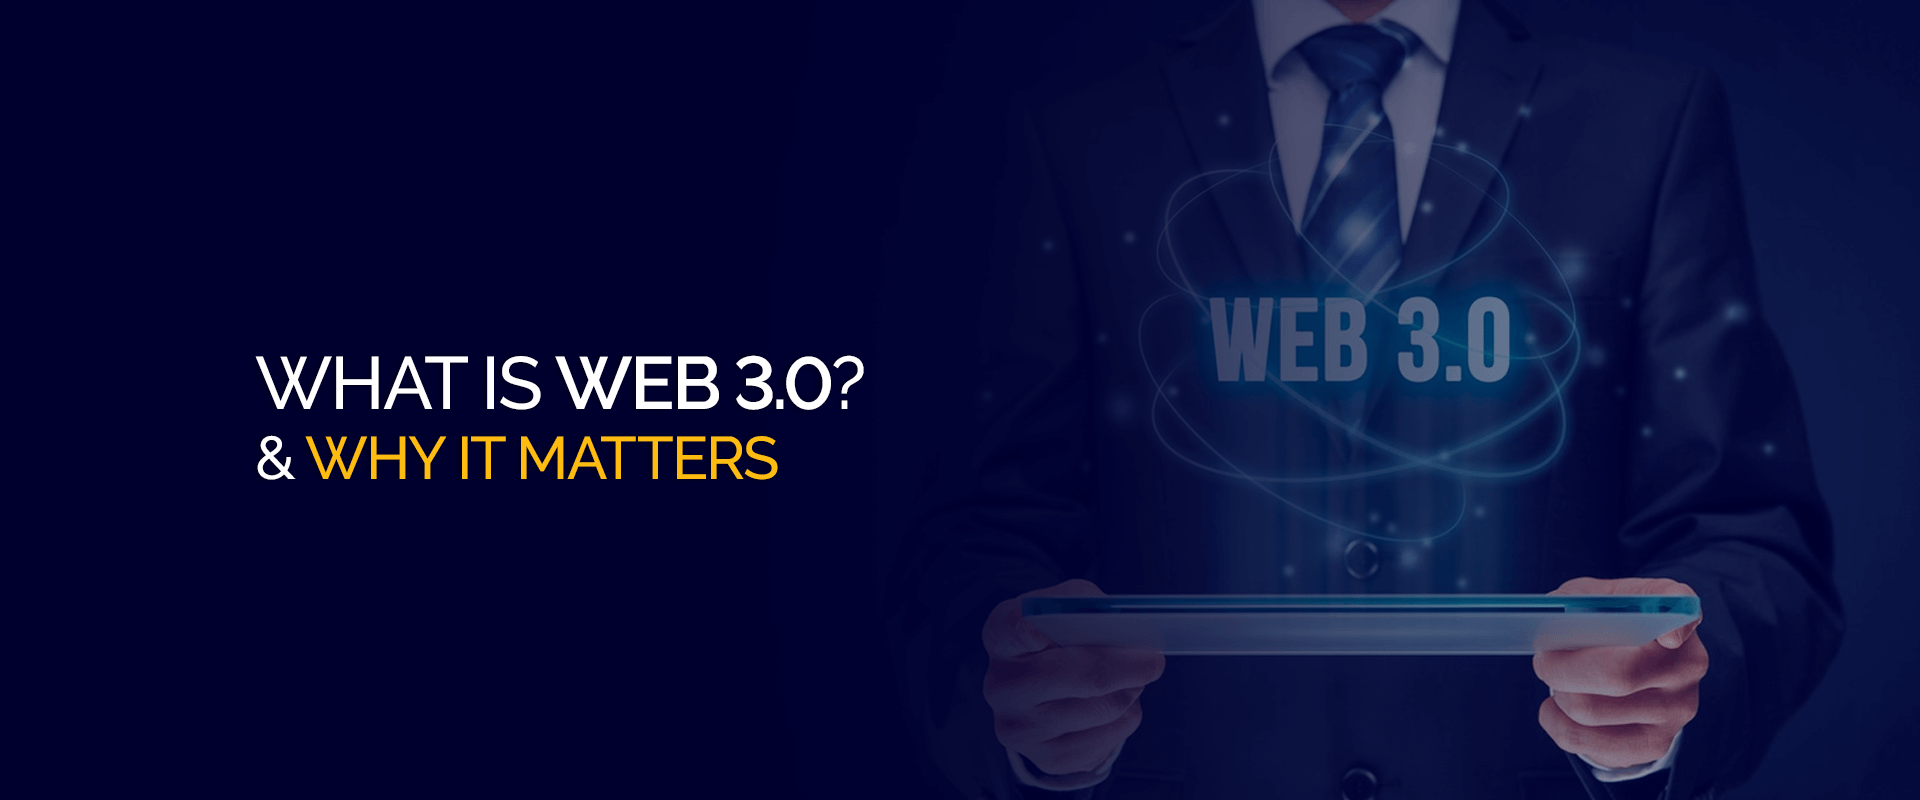 What is web 3.0 & Why it matters